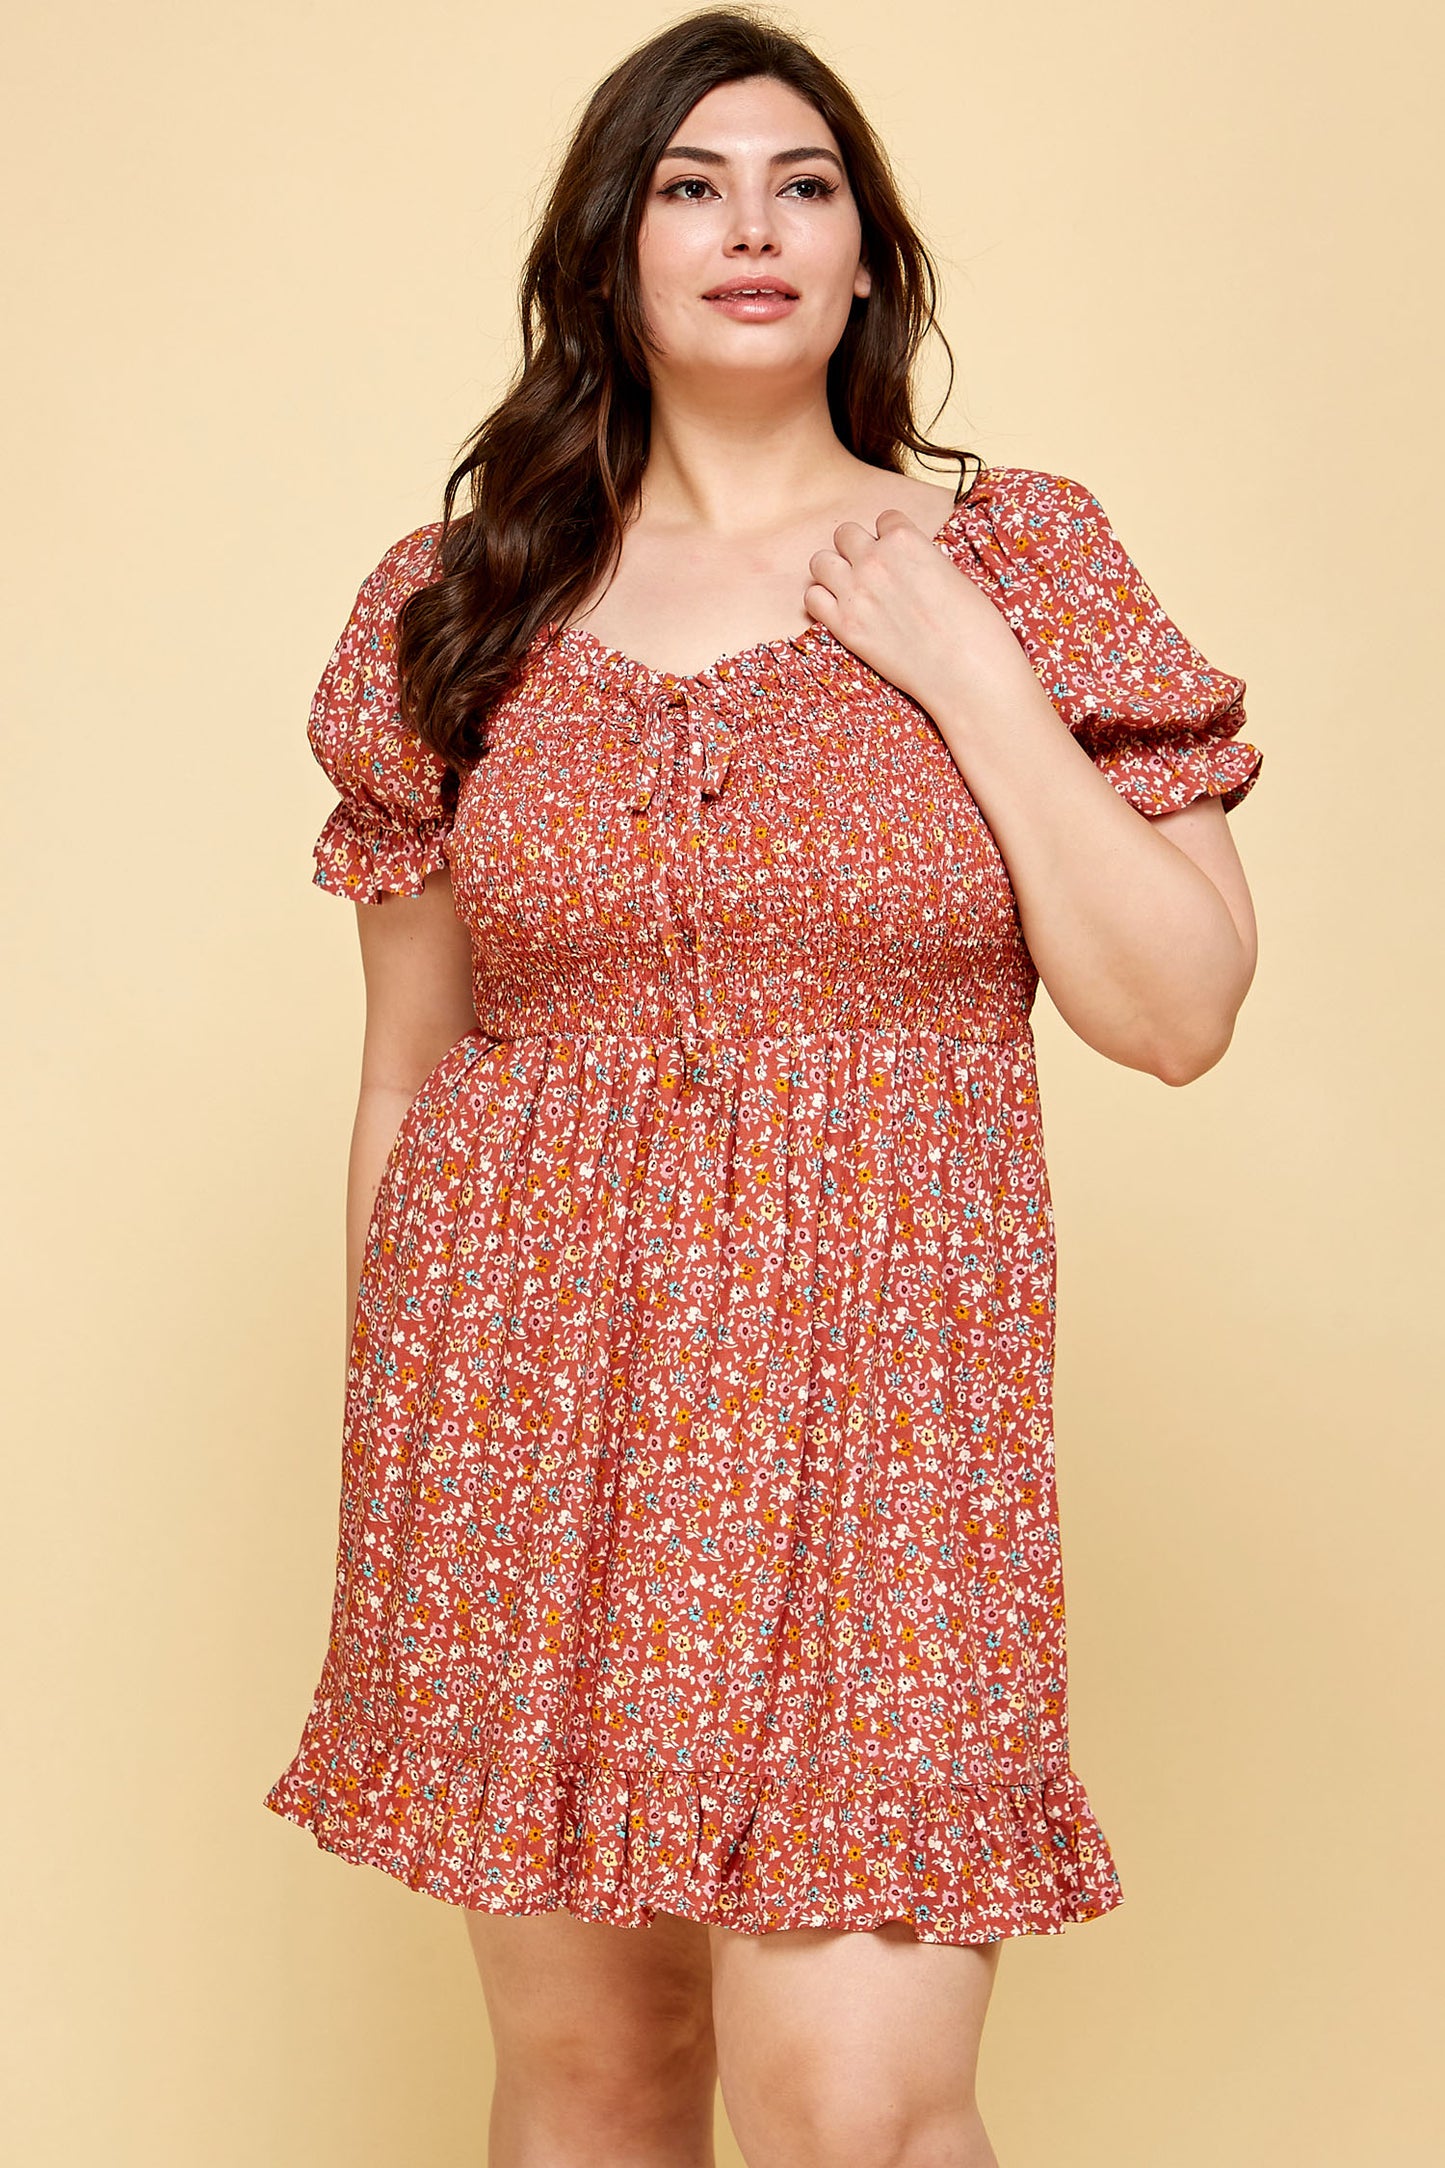 PLUS SIZE FLORAL BABYDOLL DRESS IN RUST